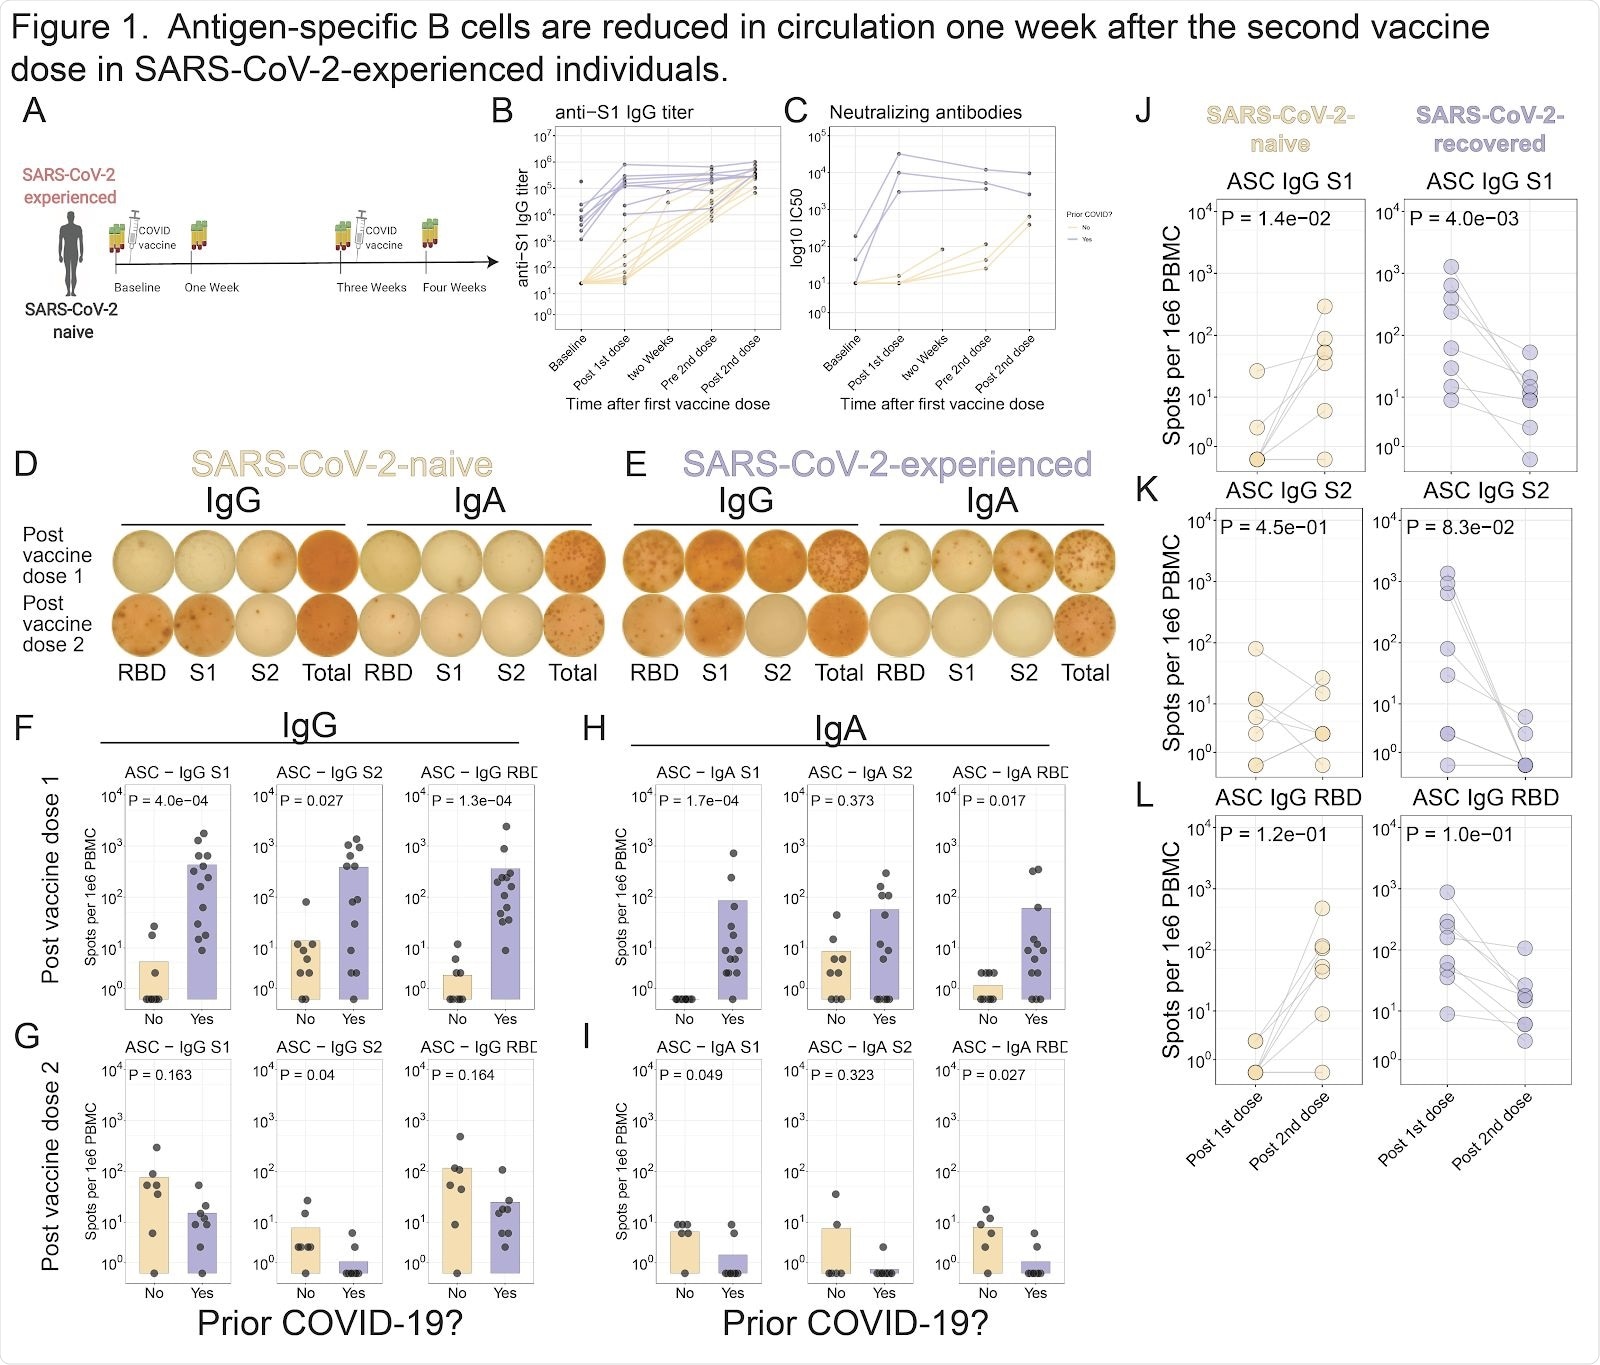 Antigen-specific B cells are reduced in circulation one week after the second vaccine dose in SARS-CoV-2-experienced individuals. A . Study schematic. B . S1 antibody titers were assessed for SARS-CoV-2 experienced (purple) and SARS-CoV-2-naive (yellow) subjects. Connected lines indicate repeated measurements of the same subjects. C . Neutralizing antibody titers were assessed using in vitro neutralization assay. D-E . ELISpot assays shown for a representative SARS-CoV-2-naive ( D ) or SARS-CoV-2-experienced ( E ) subject one week after each dose of vaccine. F-H . Summary statistics shown for ELISpot assays. For each panel, S1 (left), S2 (middle), or RBD (right) antigens are shown for IgG one week after first dose ( F ) or second dose ( G ), or for IgA one week after first dose ( H ) or second dose ( I ). J-L . ELISpot data shown for SARS-CoV-2-naive (left) or SARS-CoV-2-experienced (right) subjects for S1 ( J ), S2 ( K ), or RBD ( L ). Connected lines indicate repeated measurements from the same subjects.